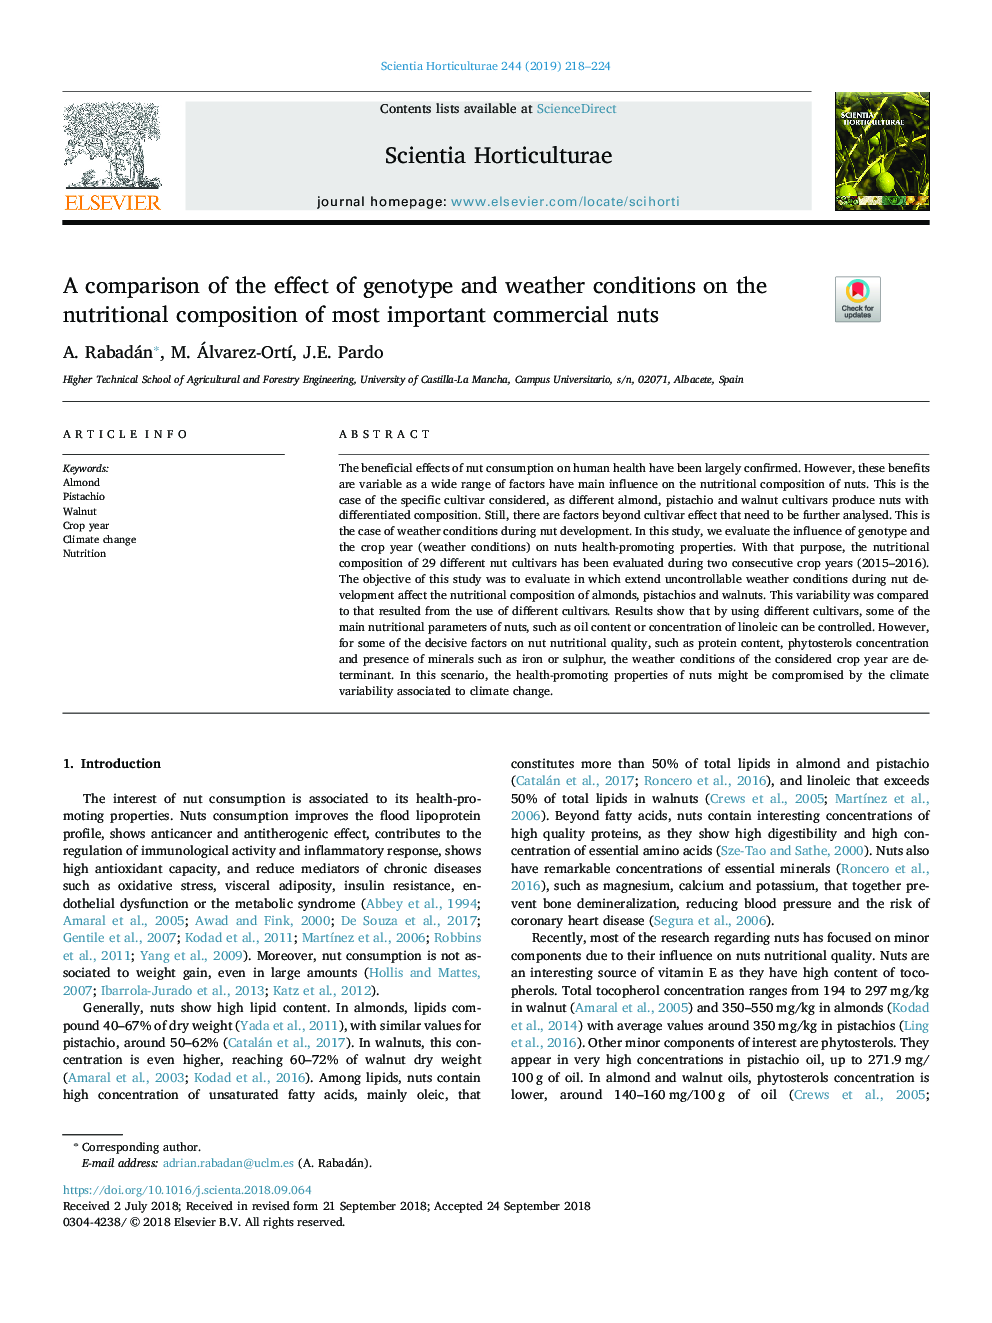 A comparison of the effect of genotype and weather conditions on the nutritional composition of most important commercial nuts